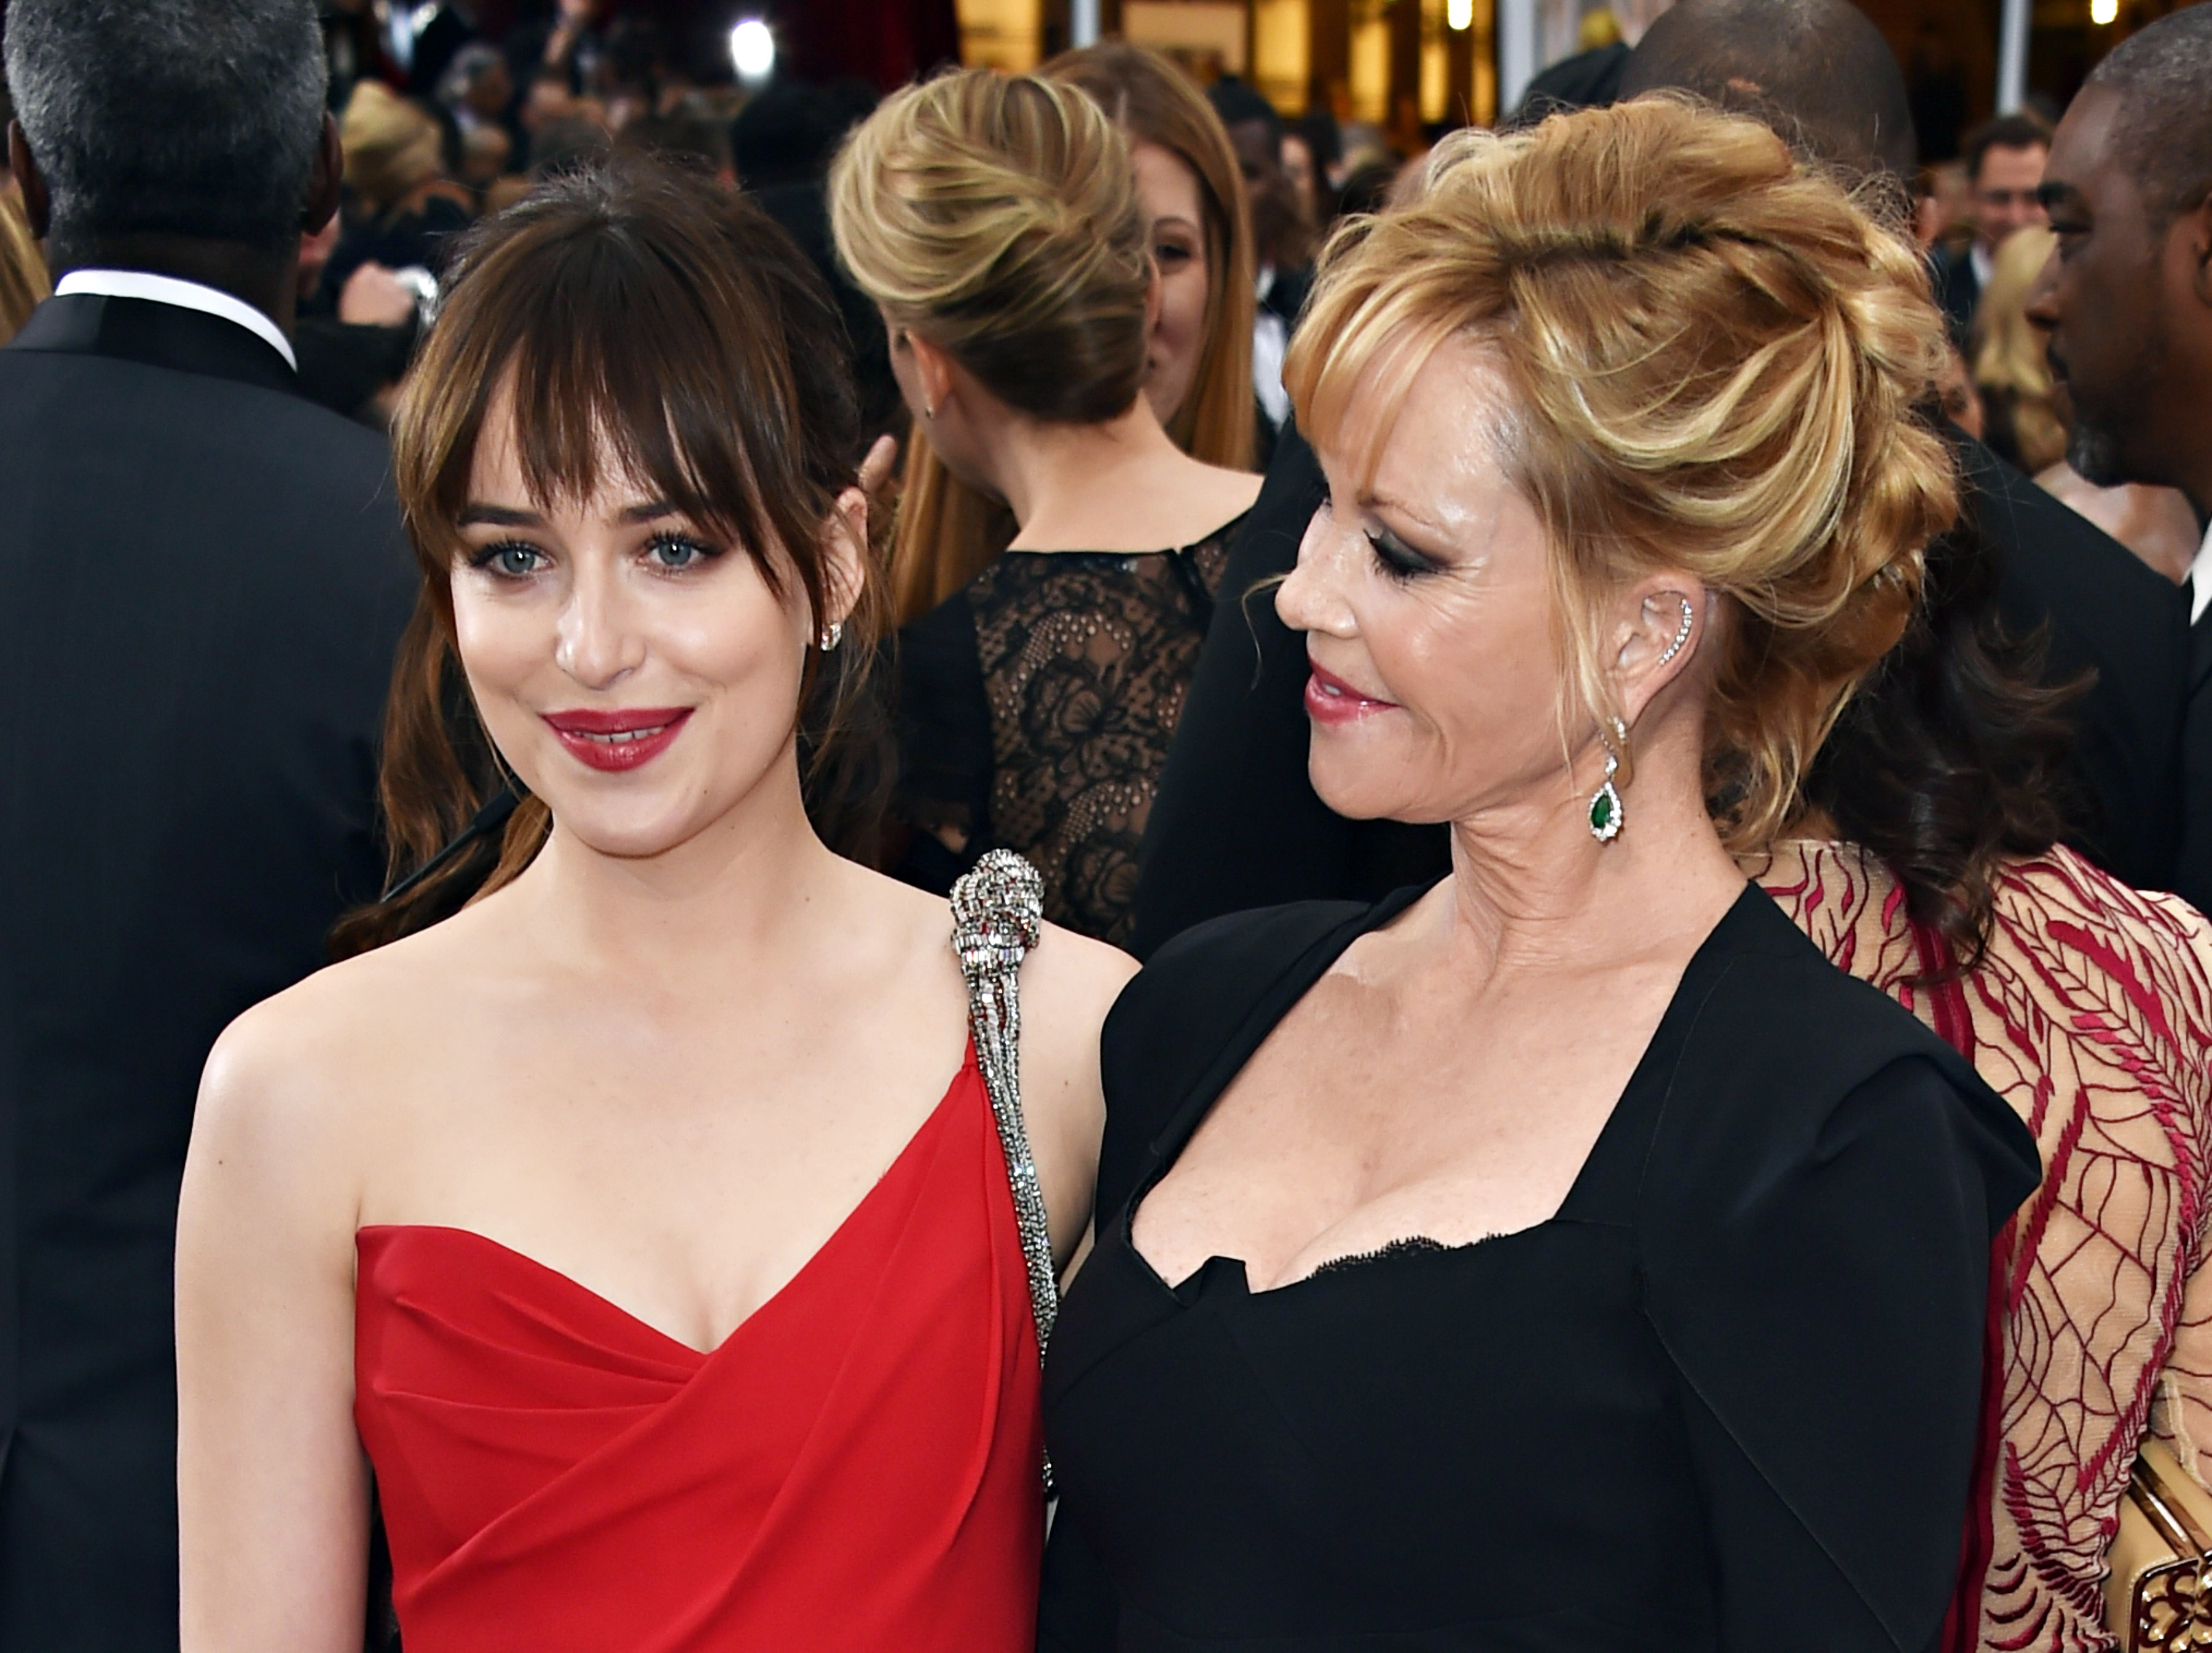 Dakota Johnson and Melanie Griffith arrive on the red carpet for the 87th Oscars in Hollywood, California on February 22, 2015 | Source: Getty Images